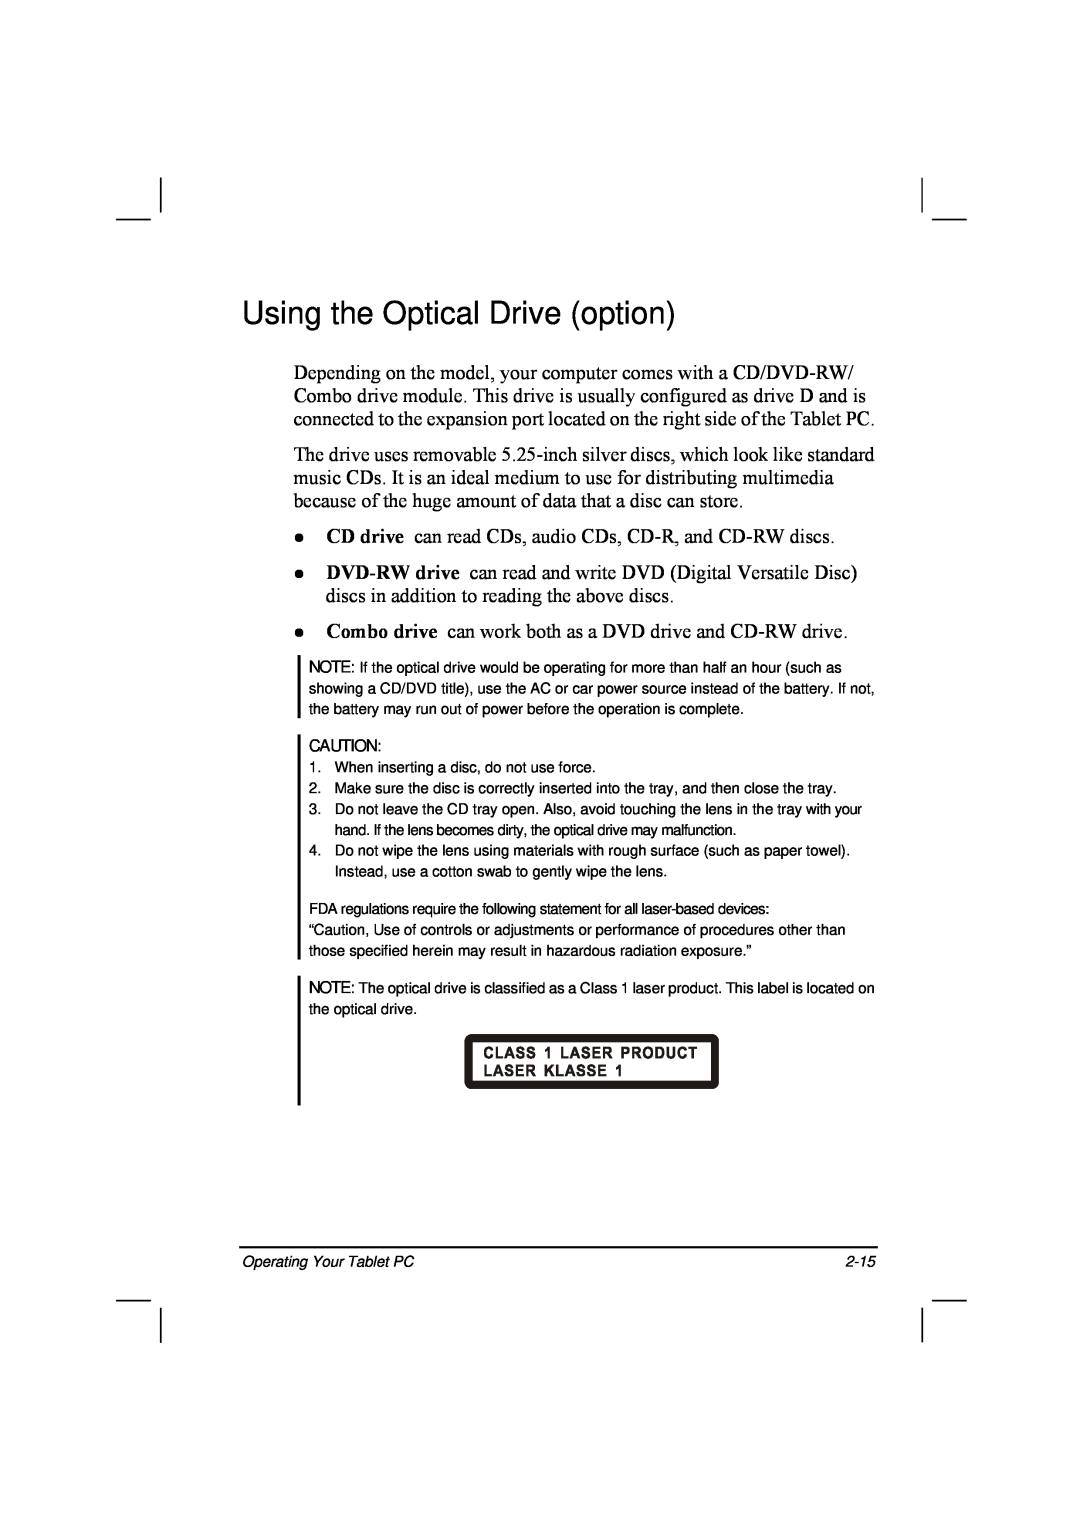 TAG 20 Series manual Using the Optical Drive option, CD drive can read CDs, audio CDs, CD-R, and CD-RW discs, 2-15 